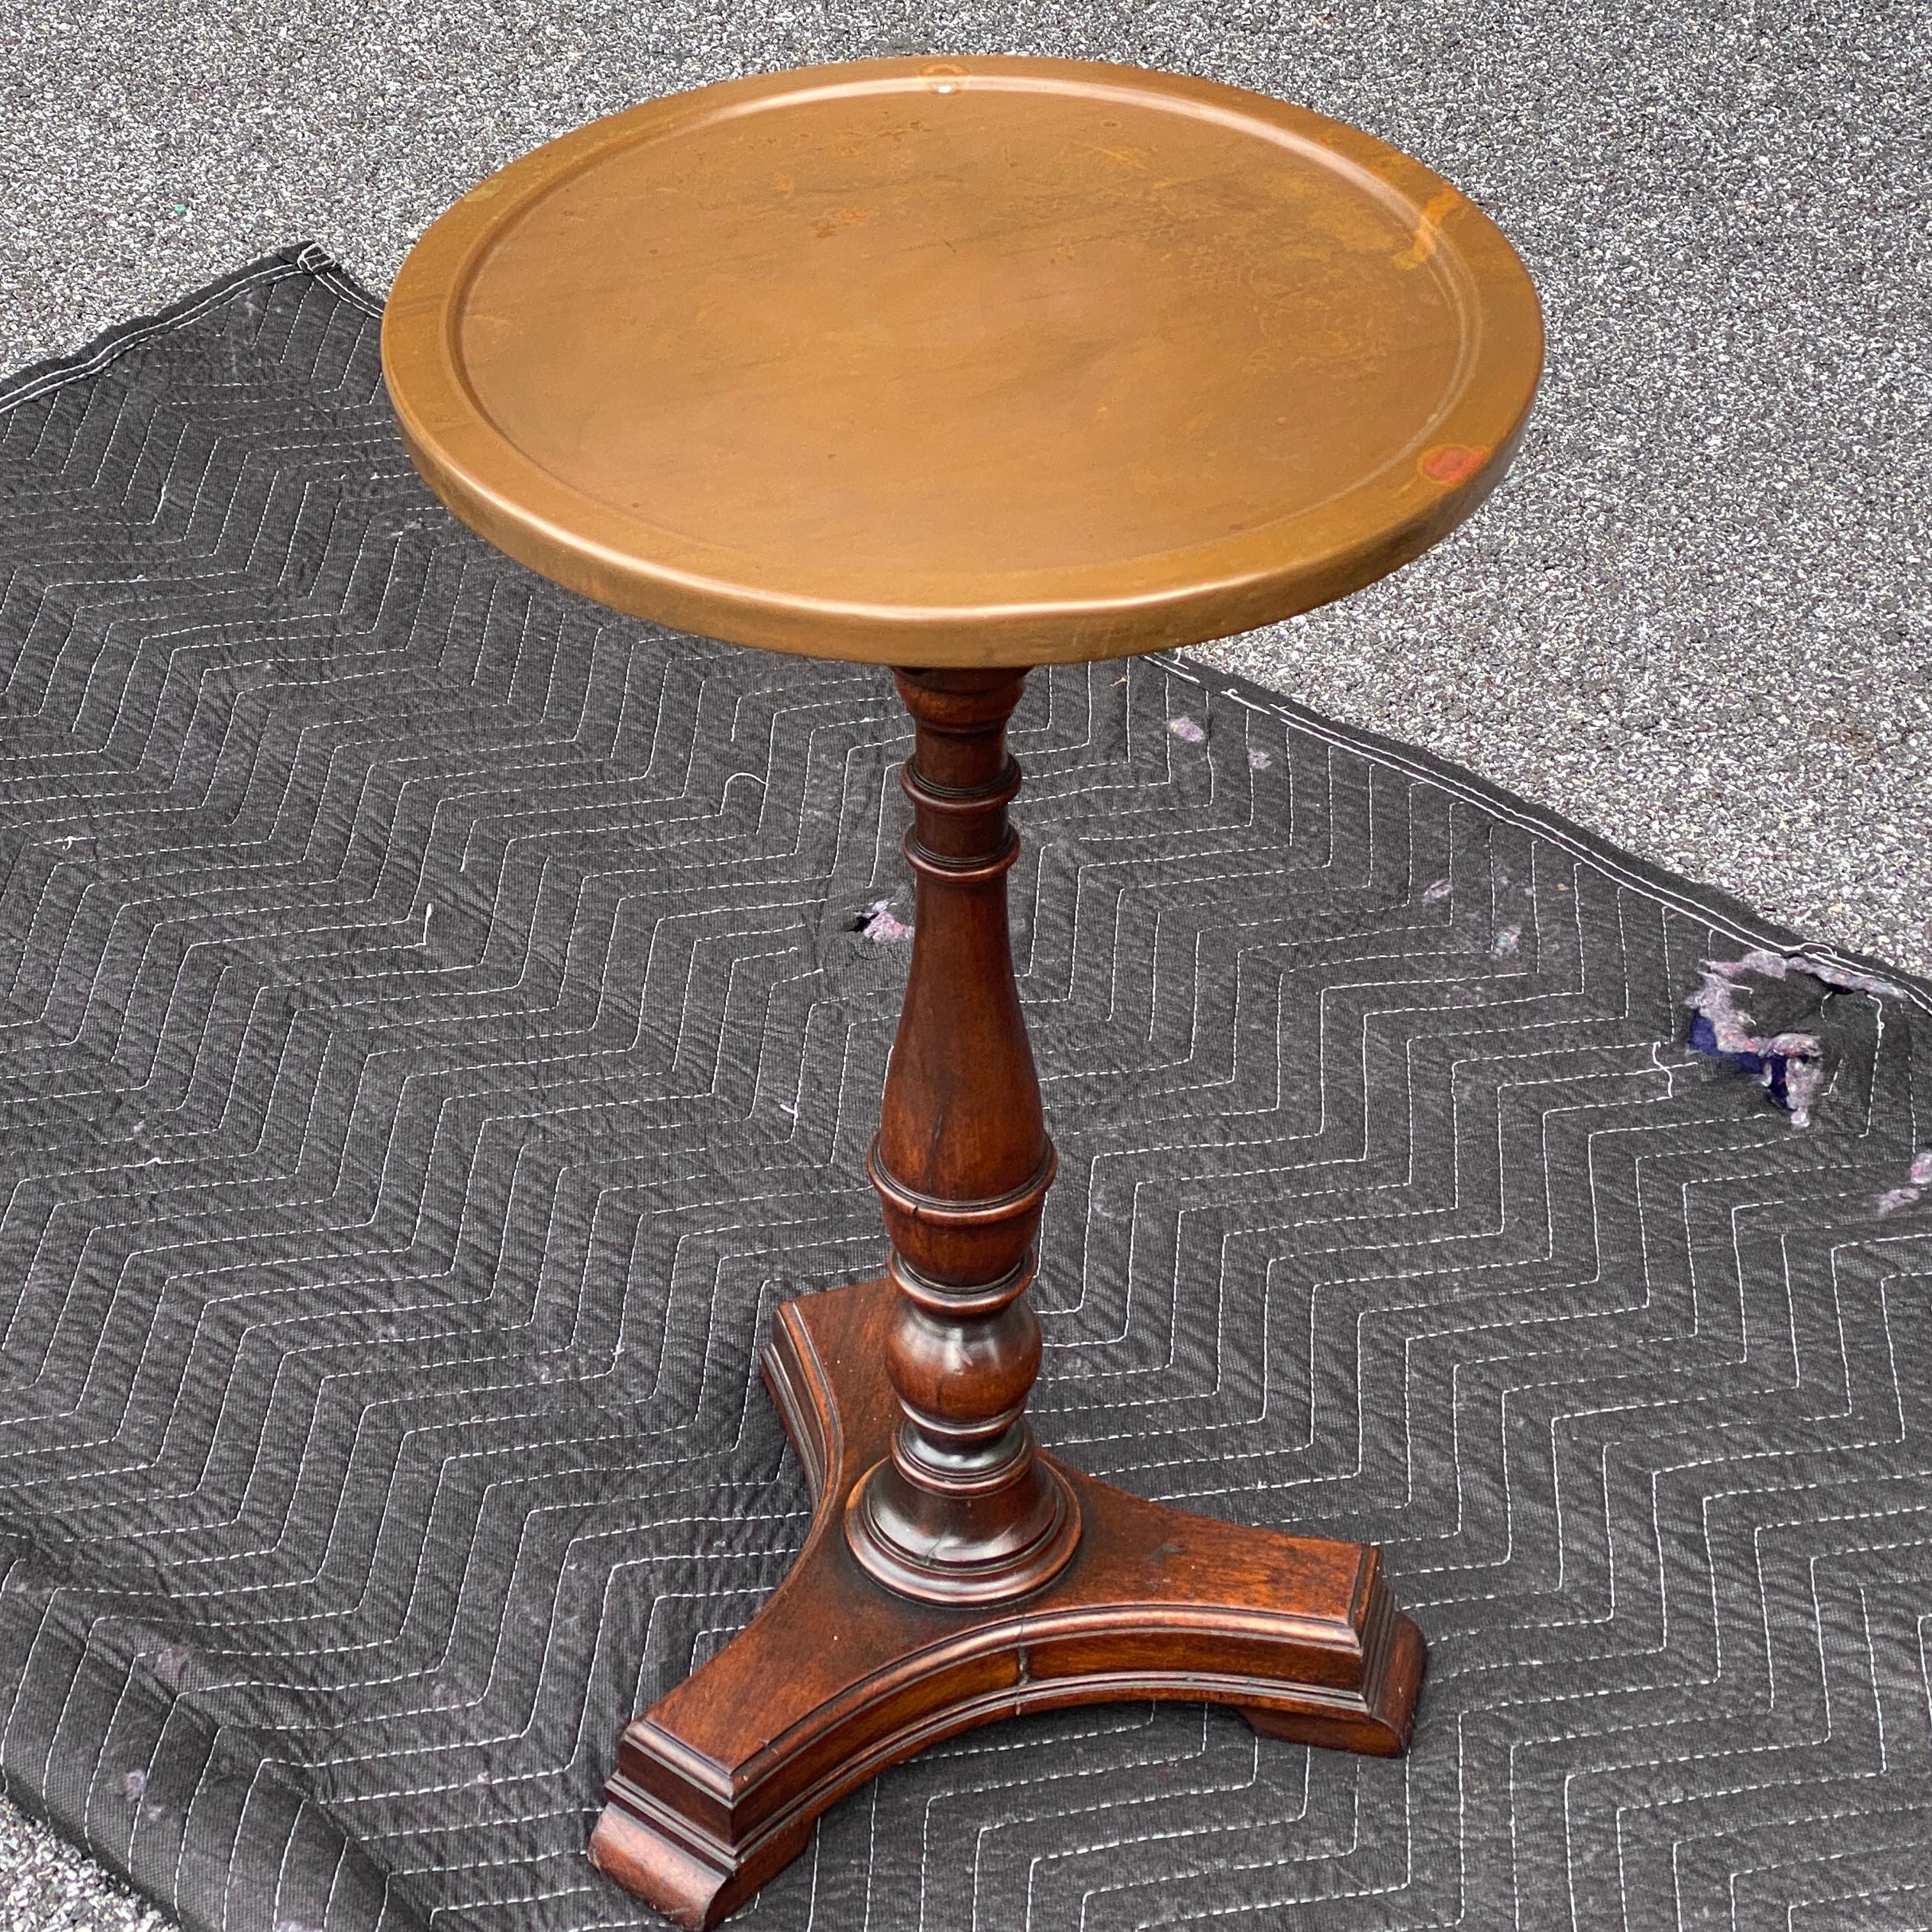 Antique copper topped turned solid mahogany pedestal drinks table, side table, or plant stand.
13” diameter inside ridge of copper top surface. Marked L265 under base.